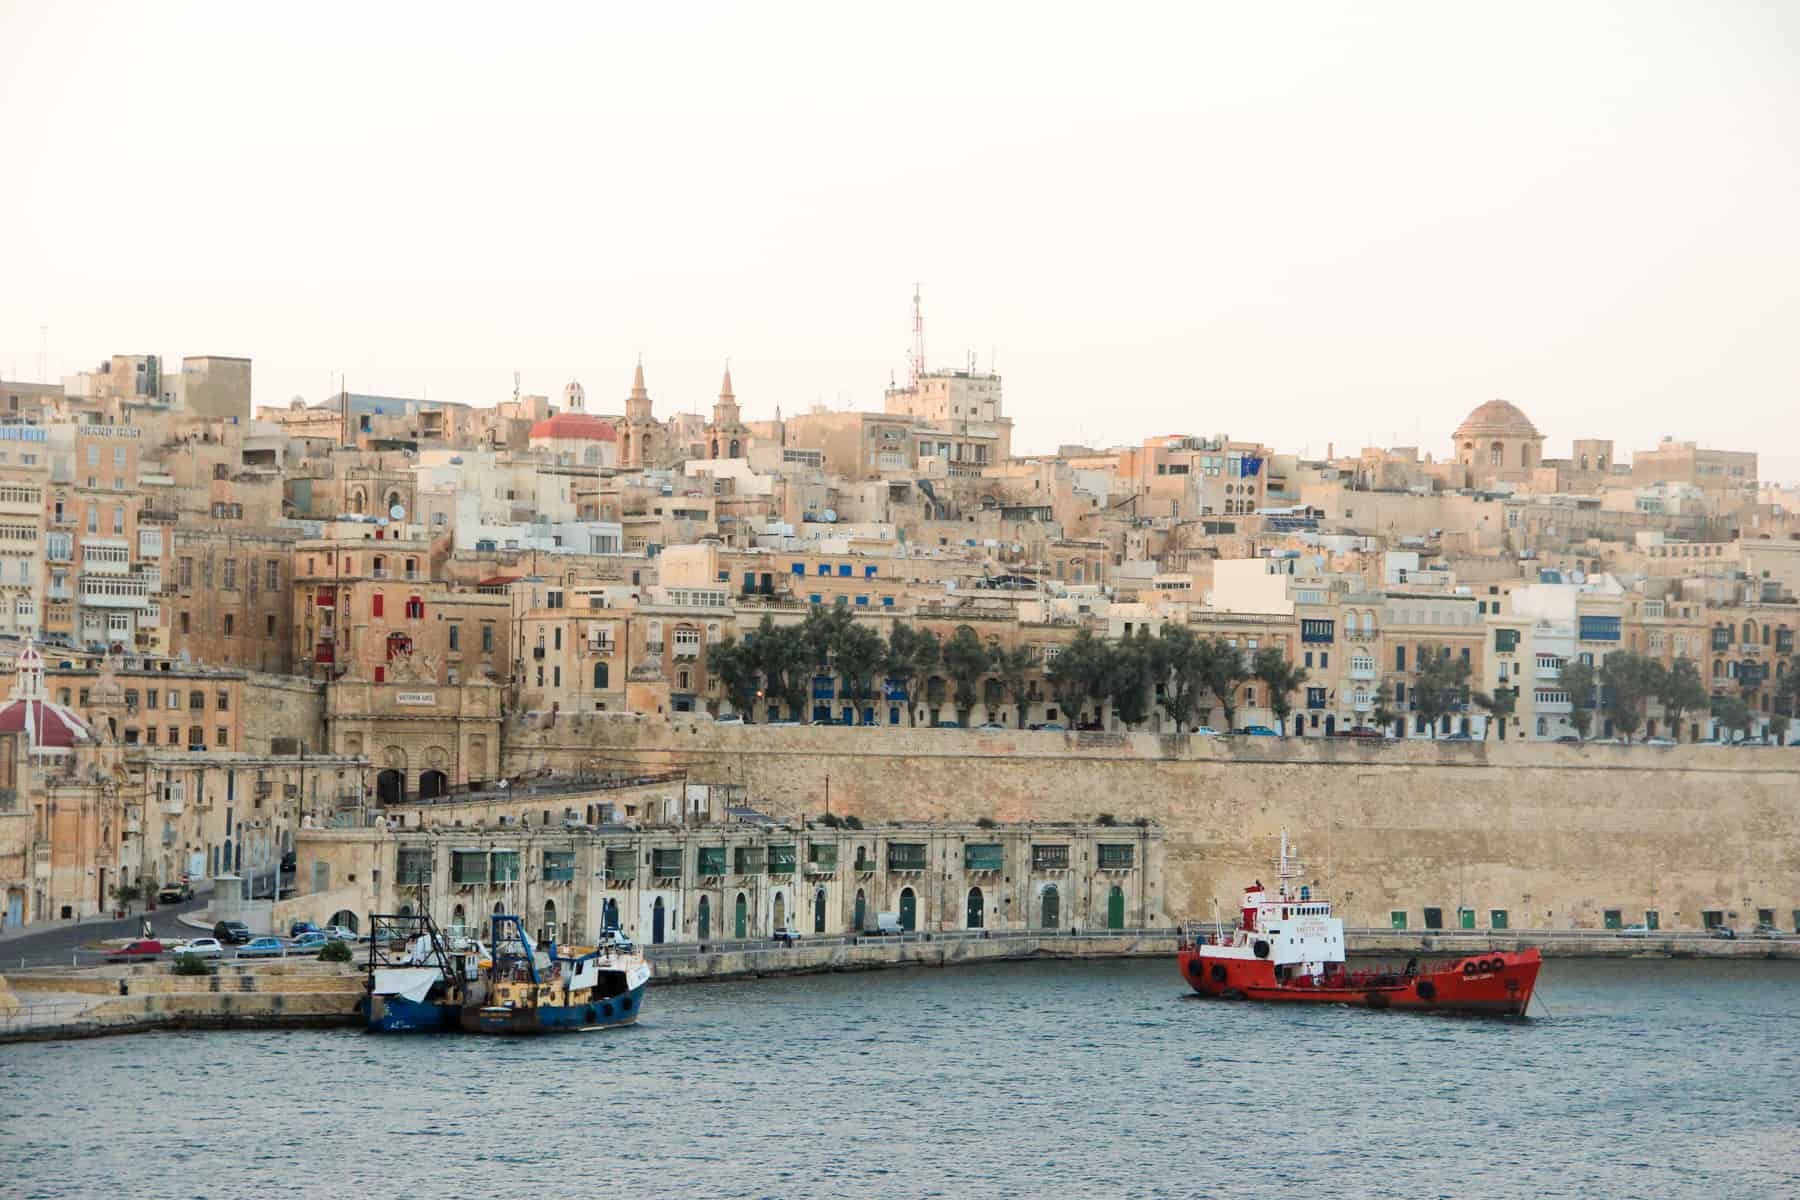 A red and white boat approached a shoreline filled with a wall and rows of old buildings in the same golden caramel hue. 